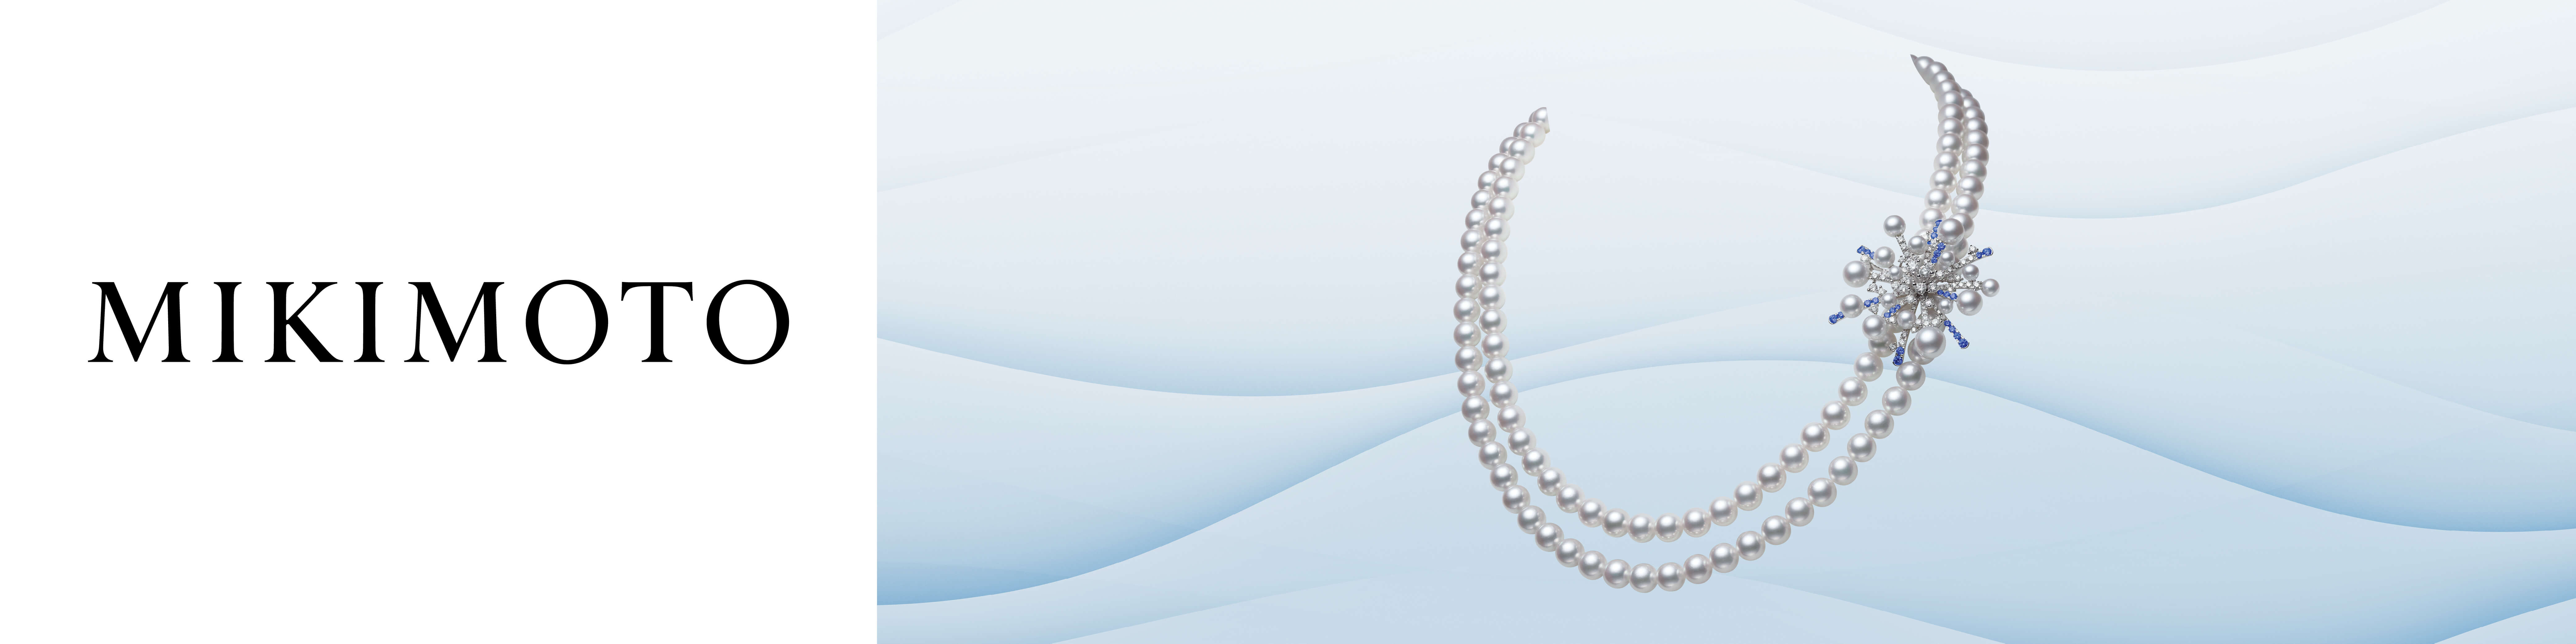 Mikimoto Necklace Banner